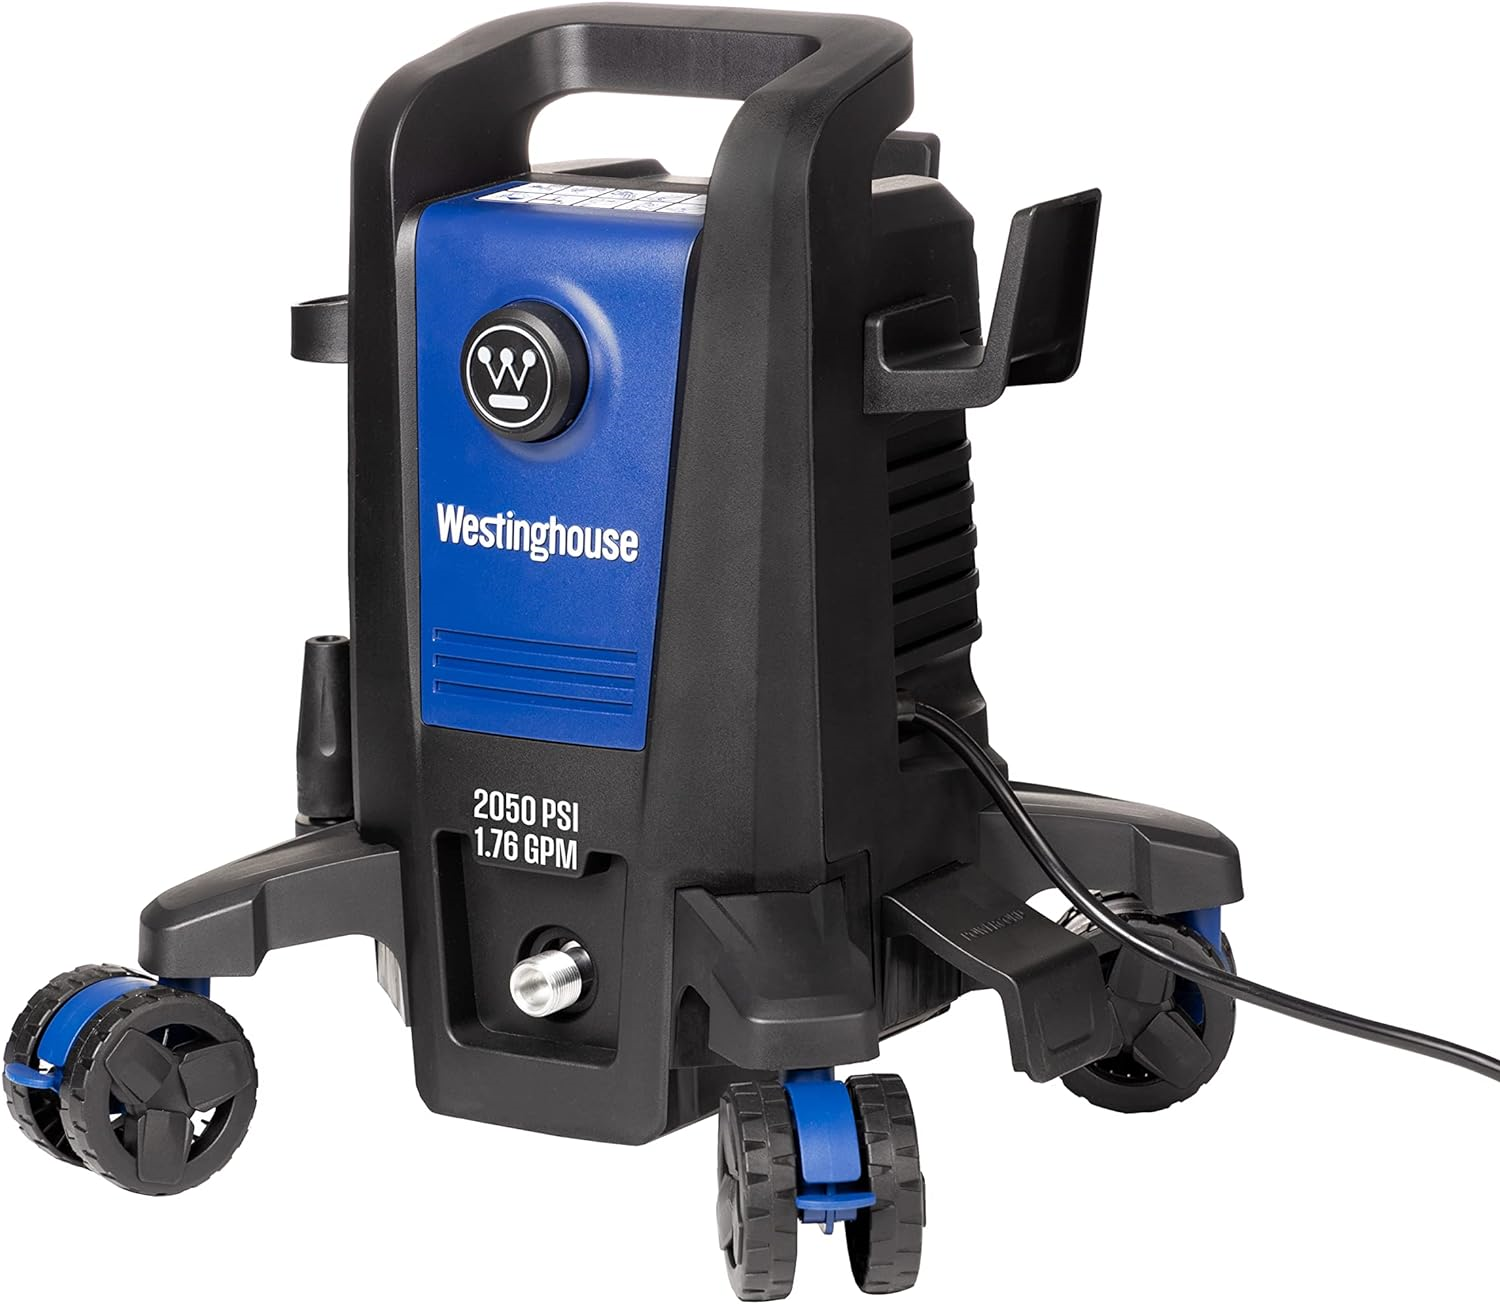 Westinghouse, Westinghouse ePX3100 Electric Pressure Washer 2050 PSI 1.76 GPM New